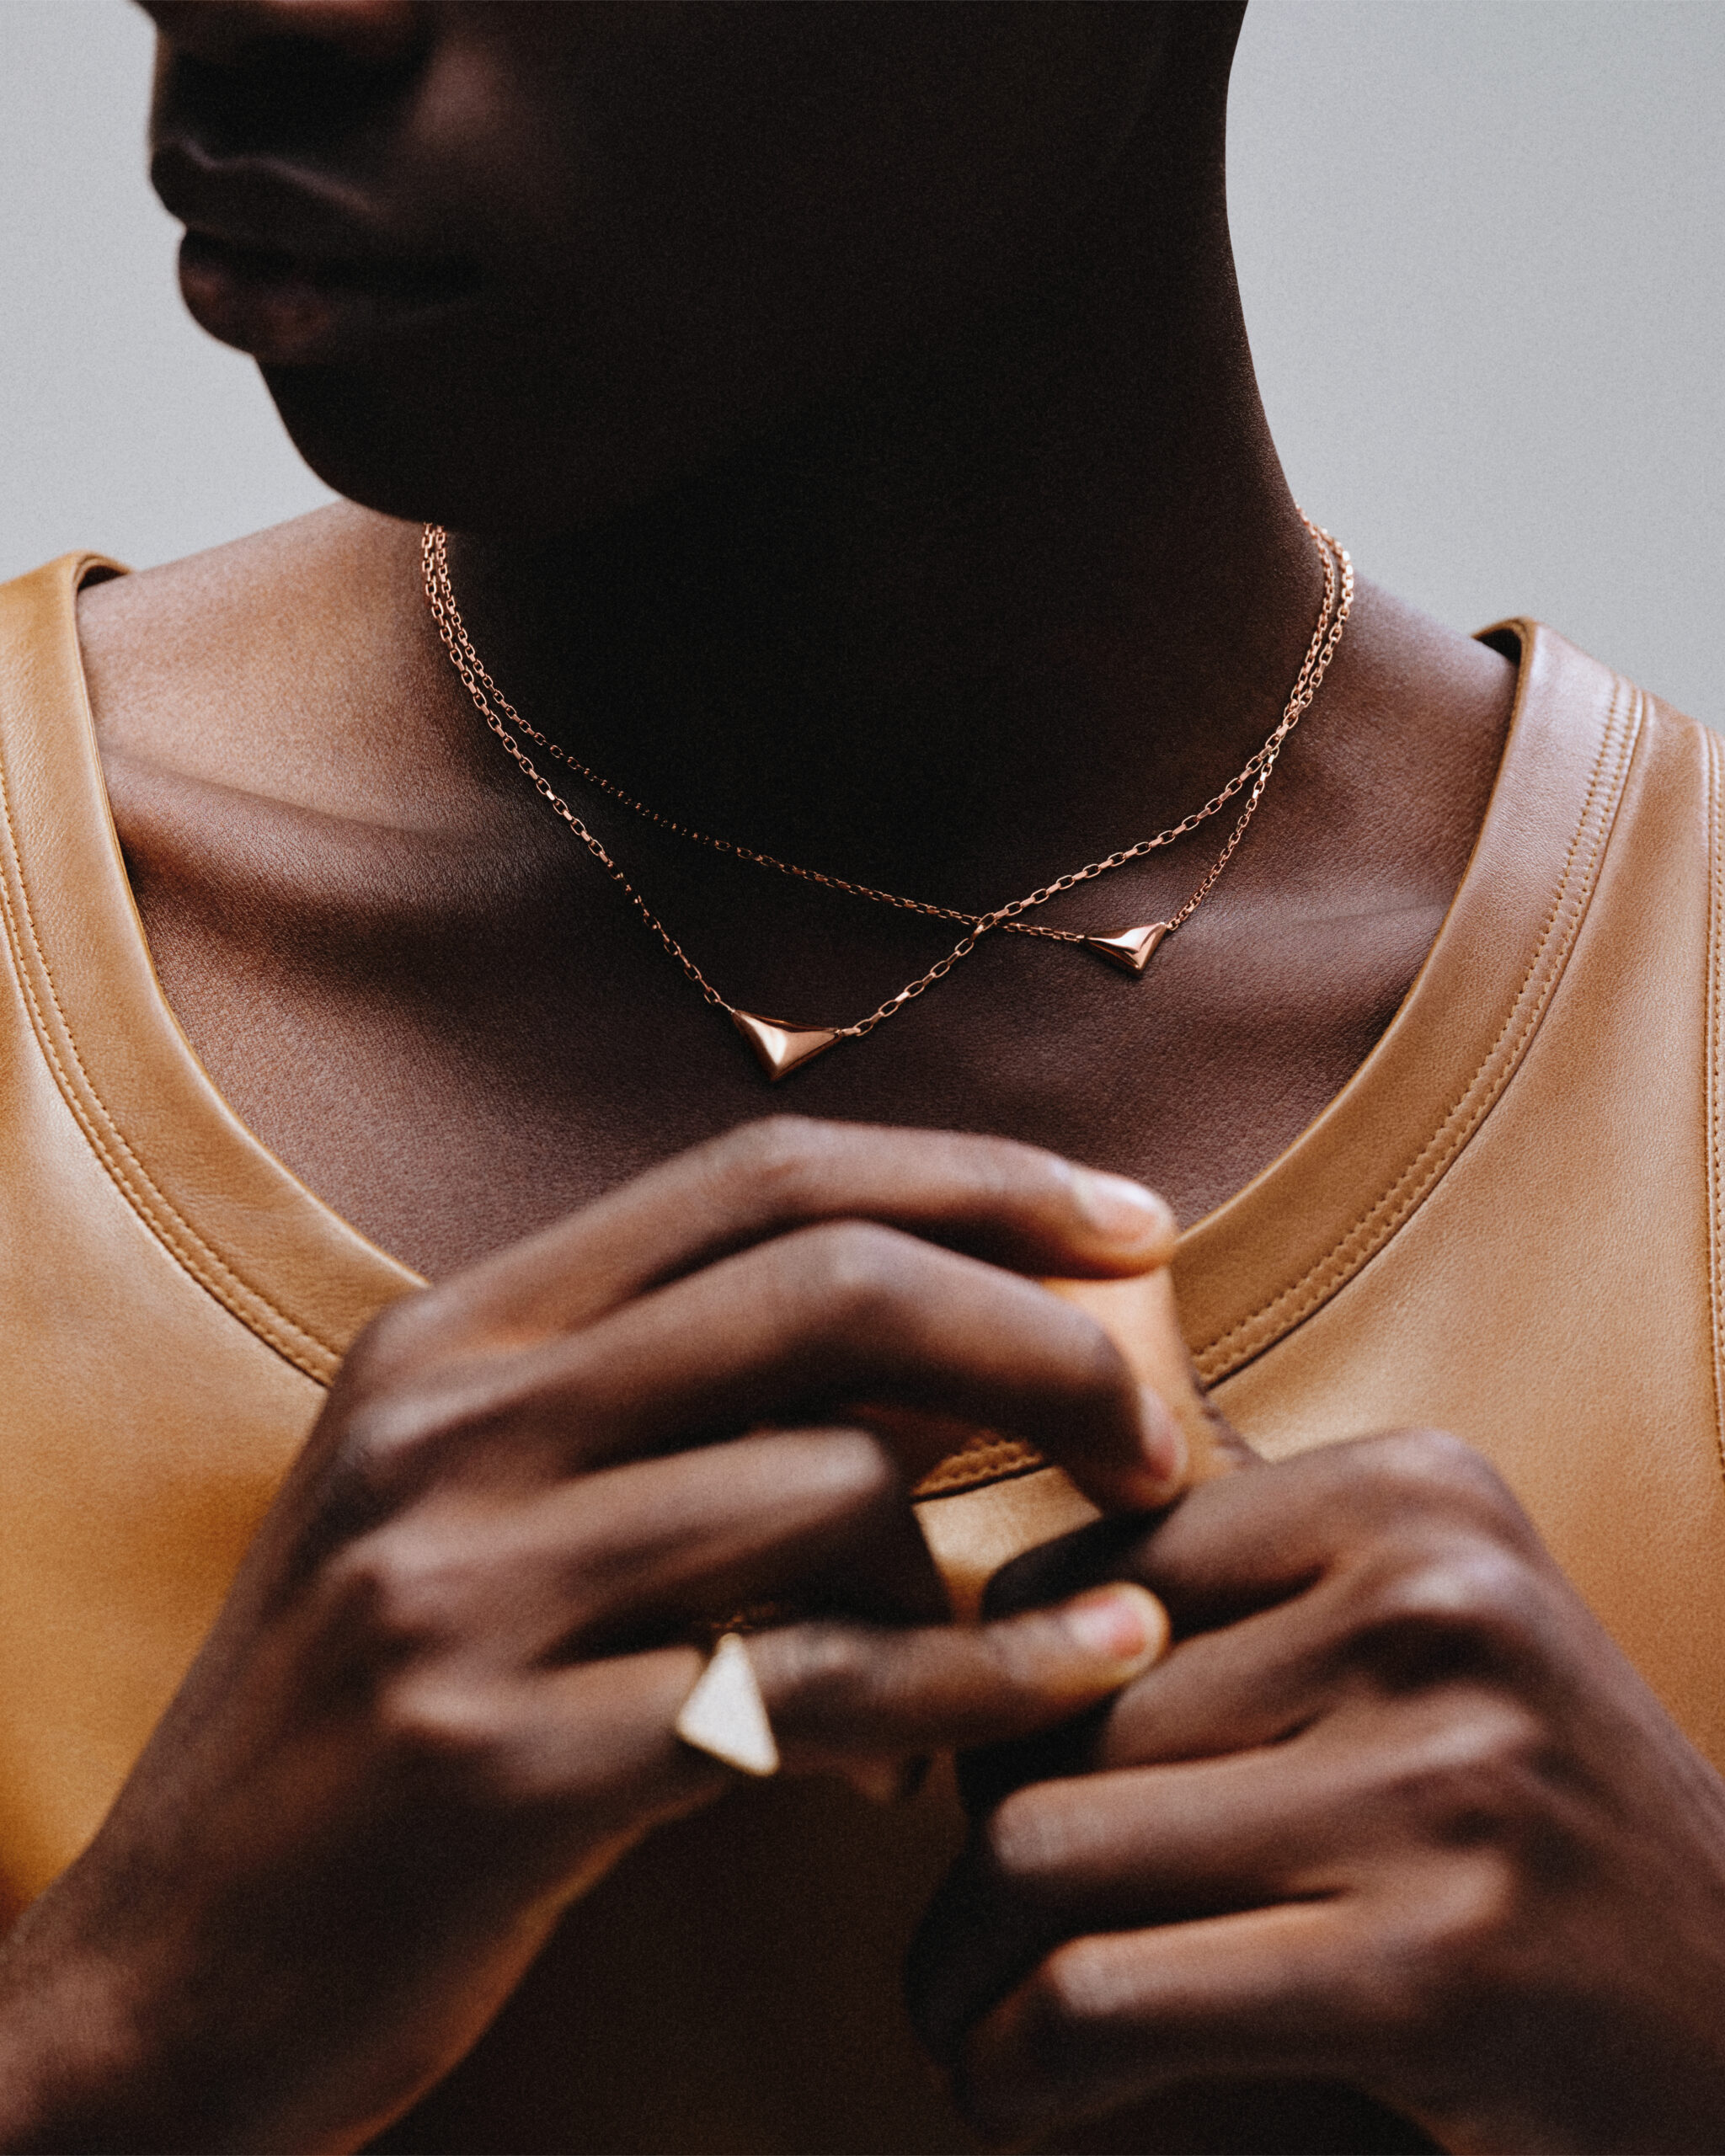 Prada's Latest 'Eternal Gold' Fine Jewelry Collection Welcomes